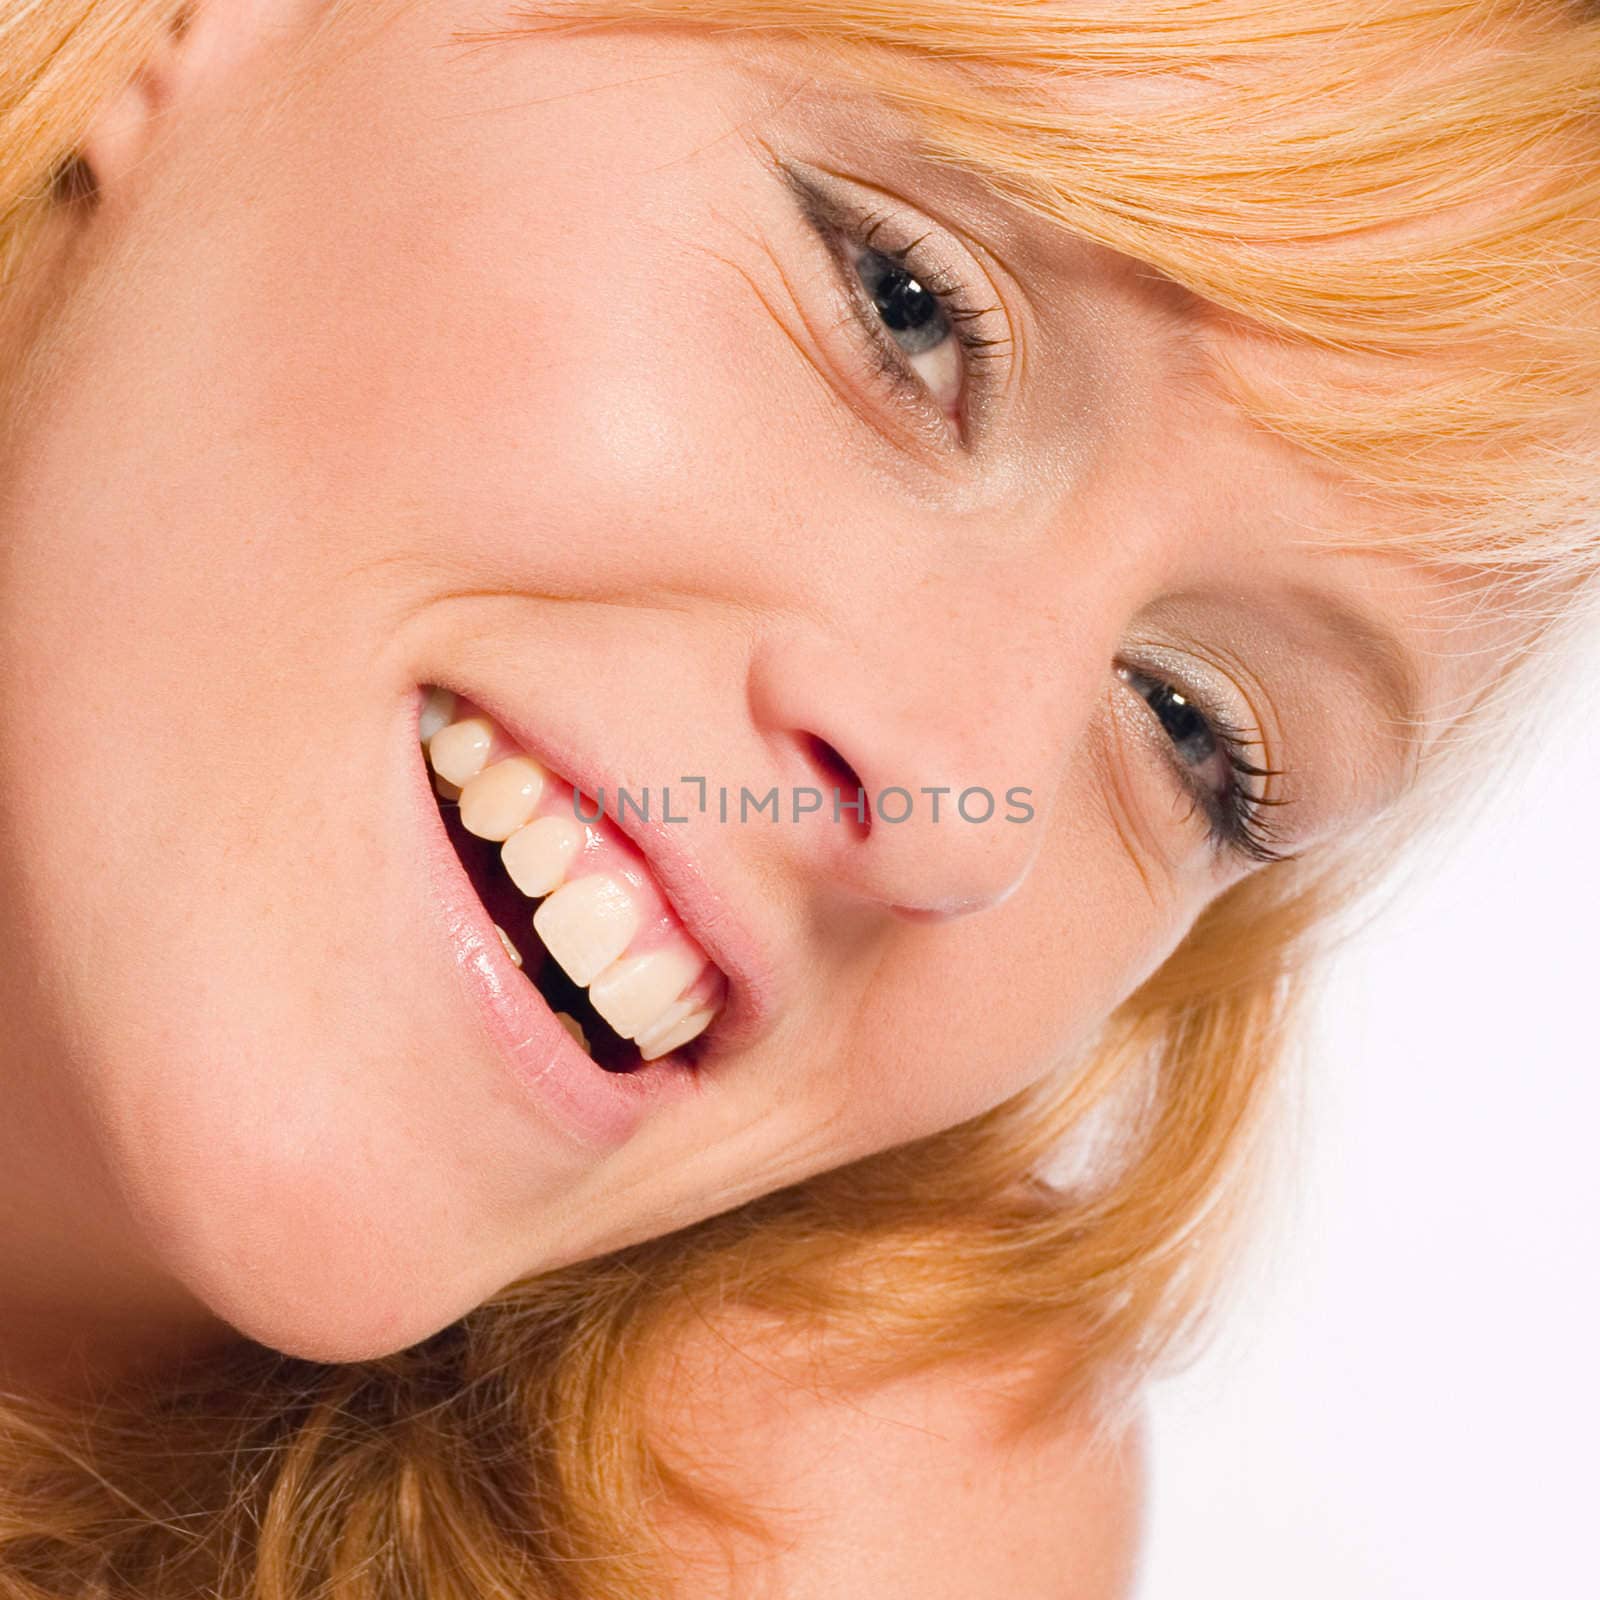 Smiling reddish girl by DNFStyle